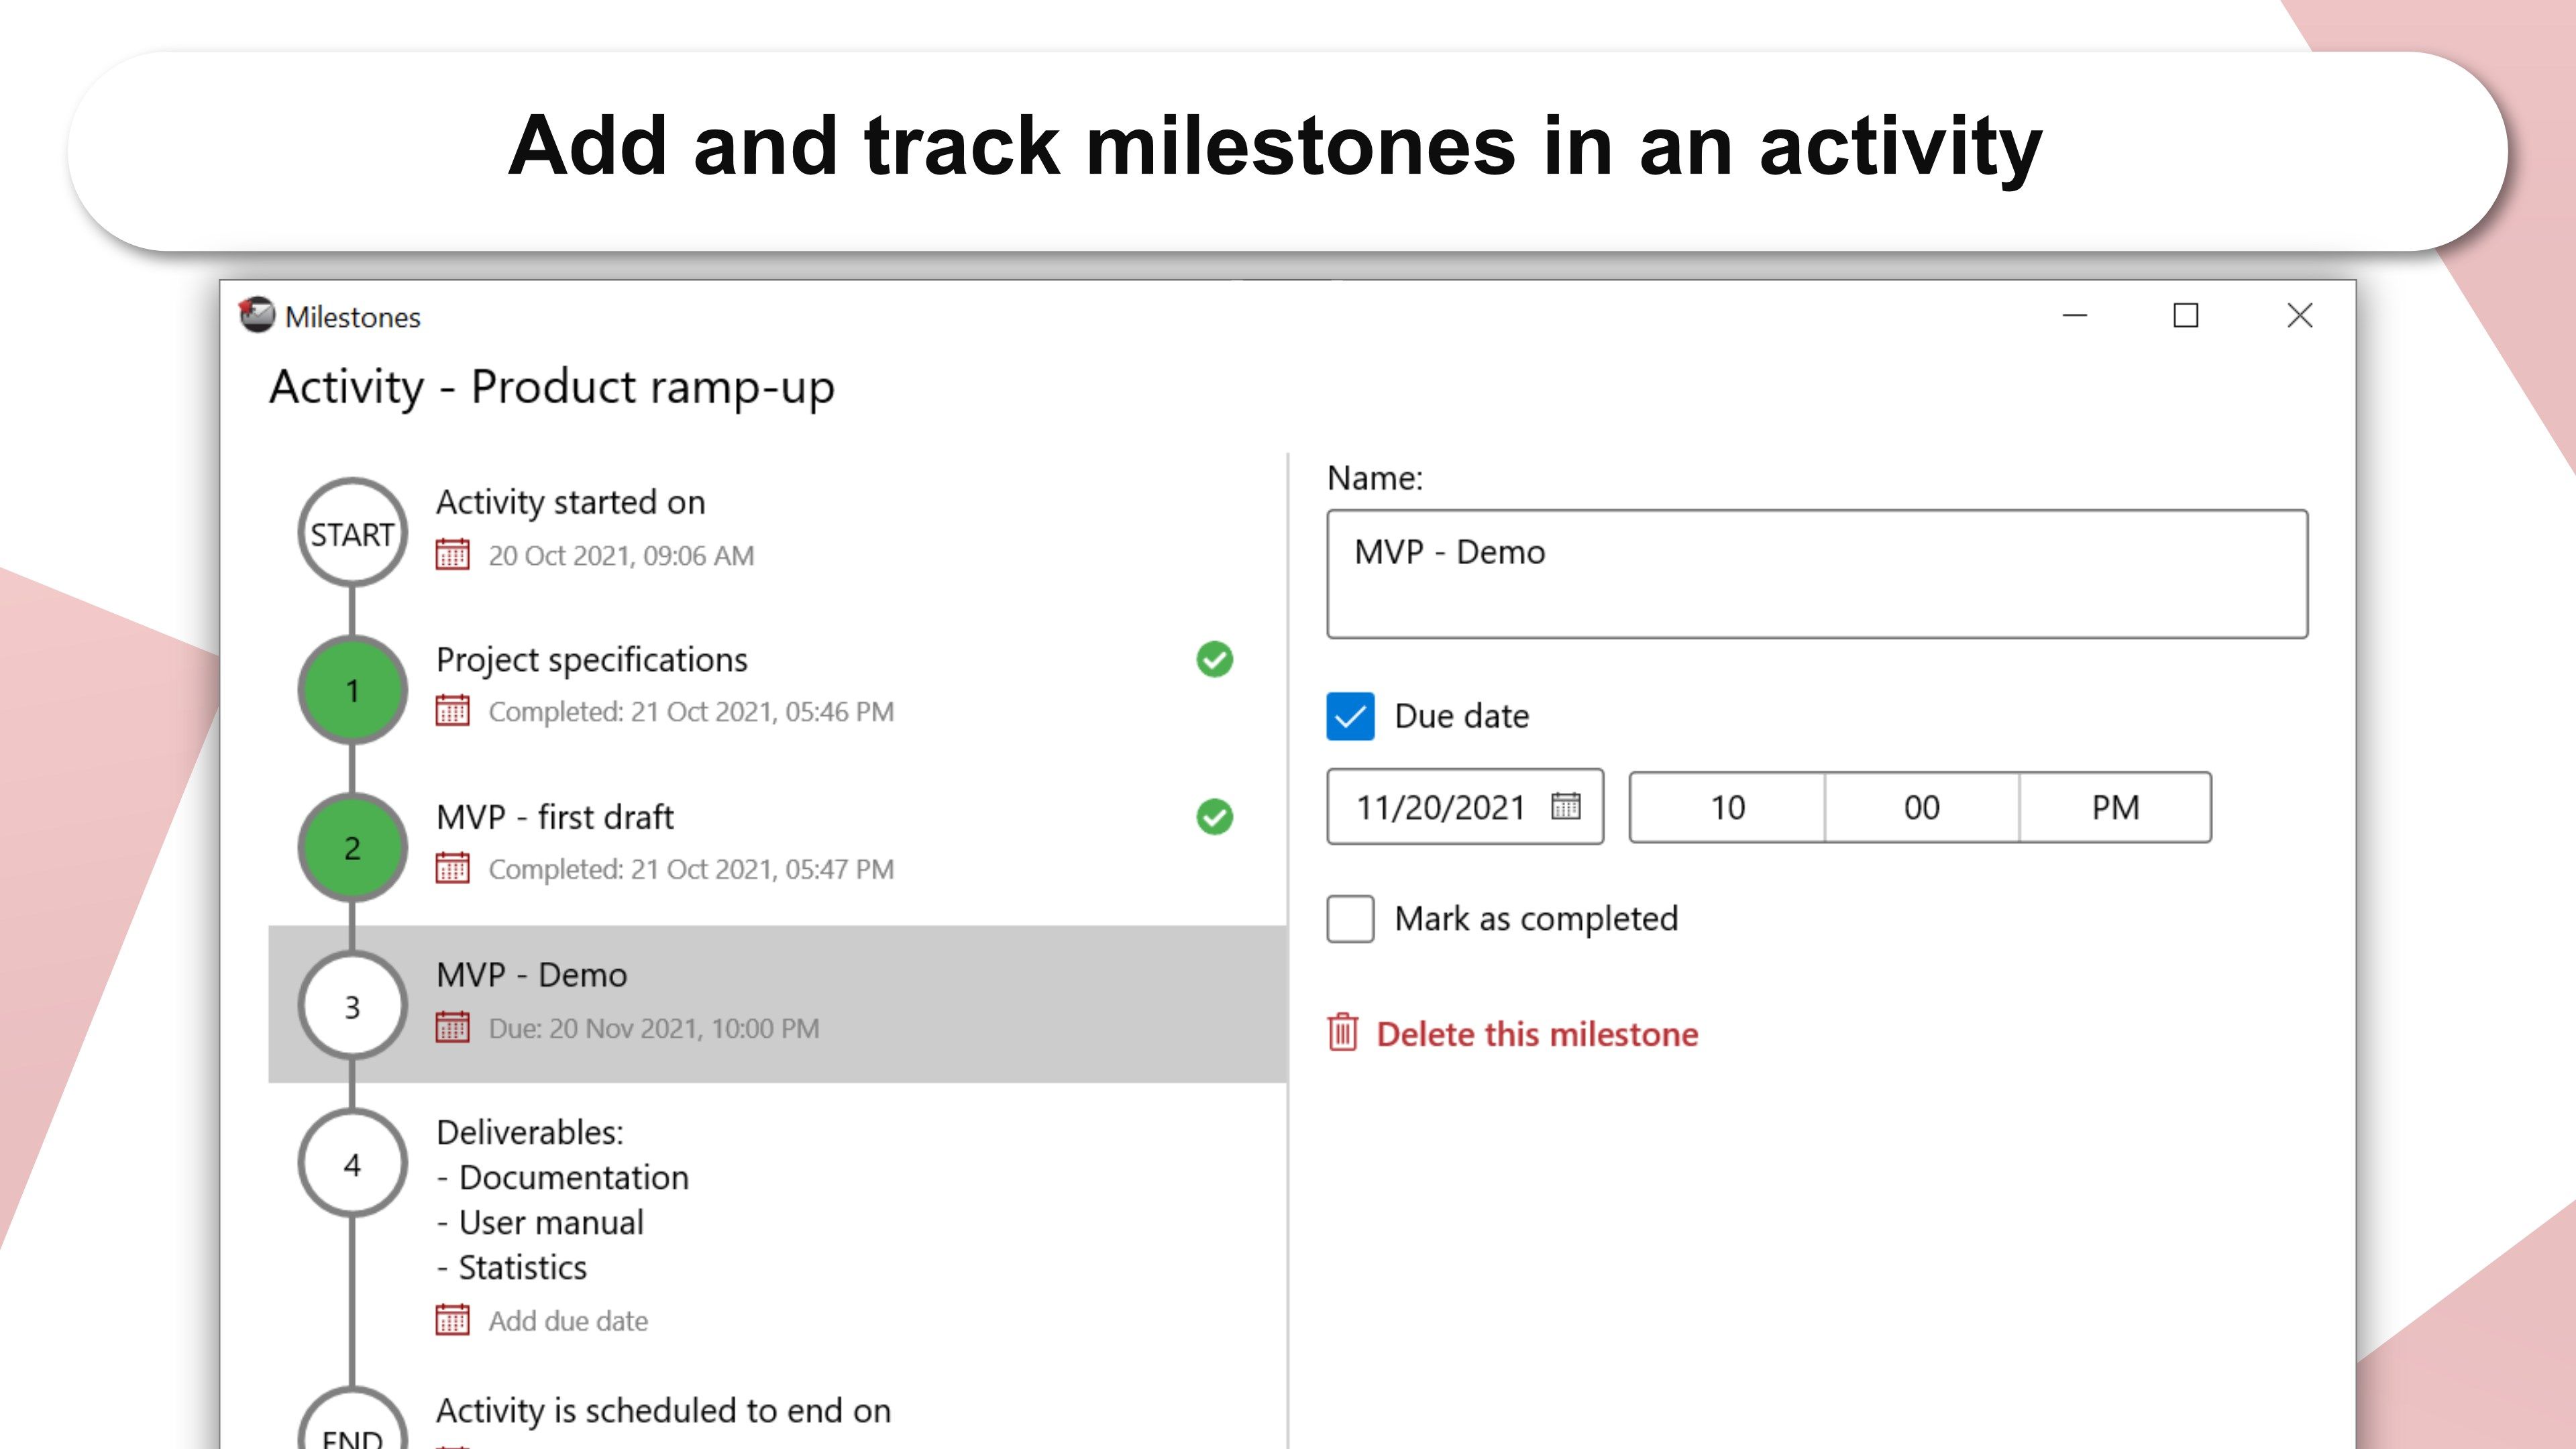 Add and track milestones in an activity